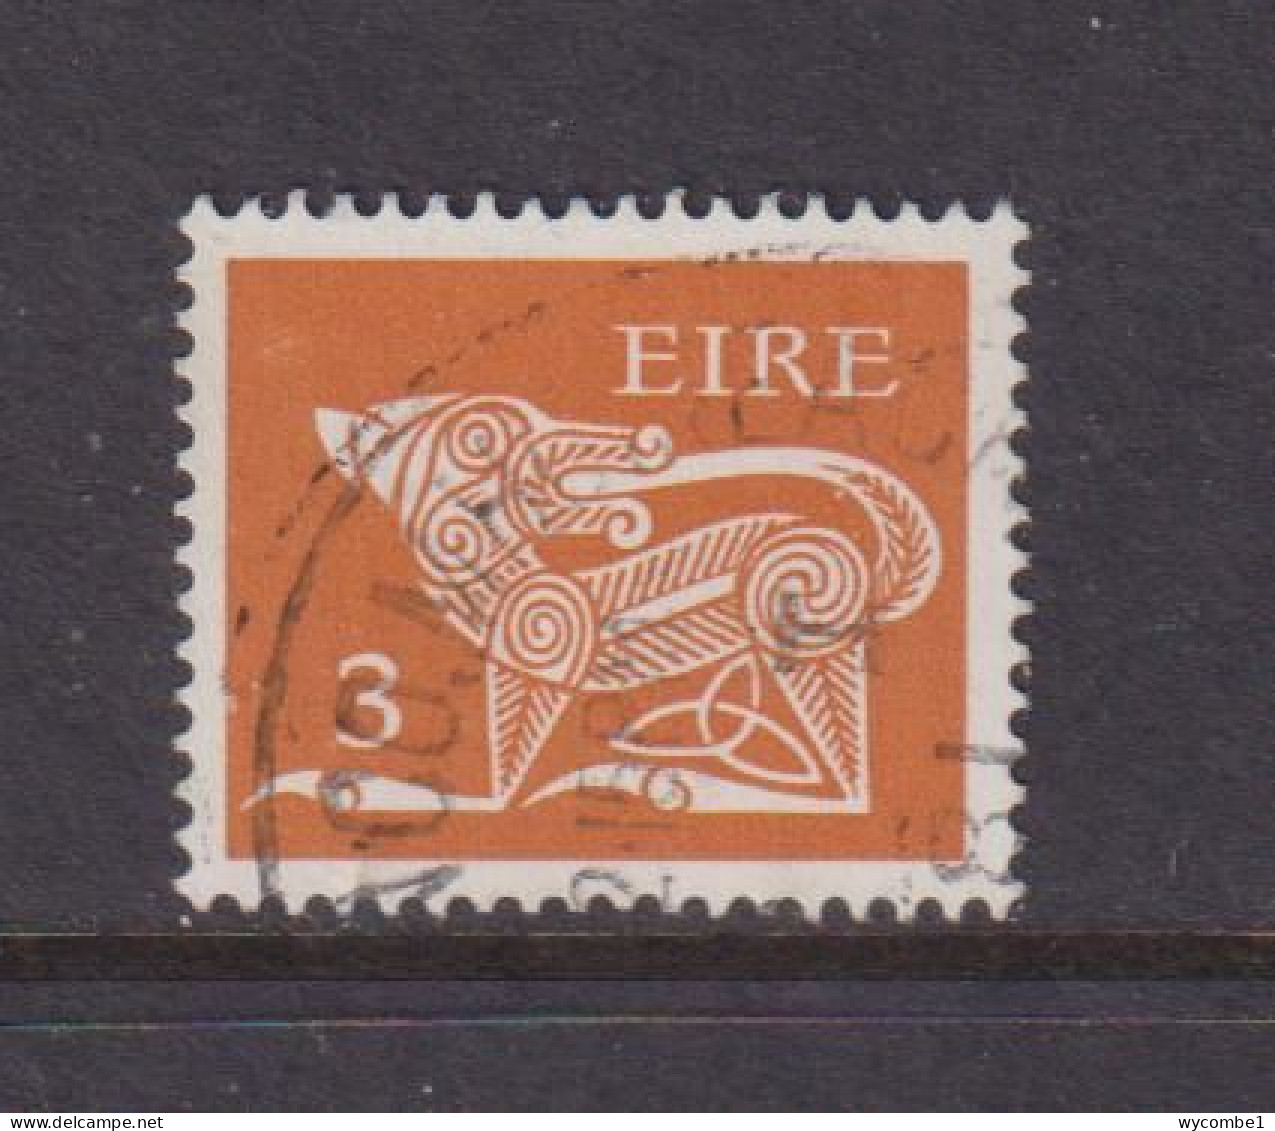 IRELAND - 1971  Decimal Currency Definitives  3p  Used As Scan - Used Stamps